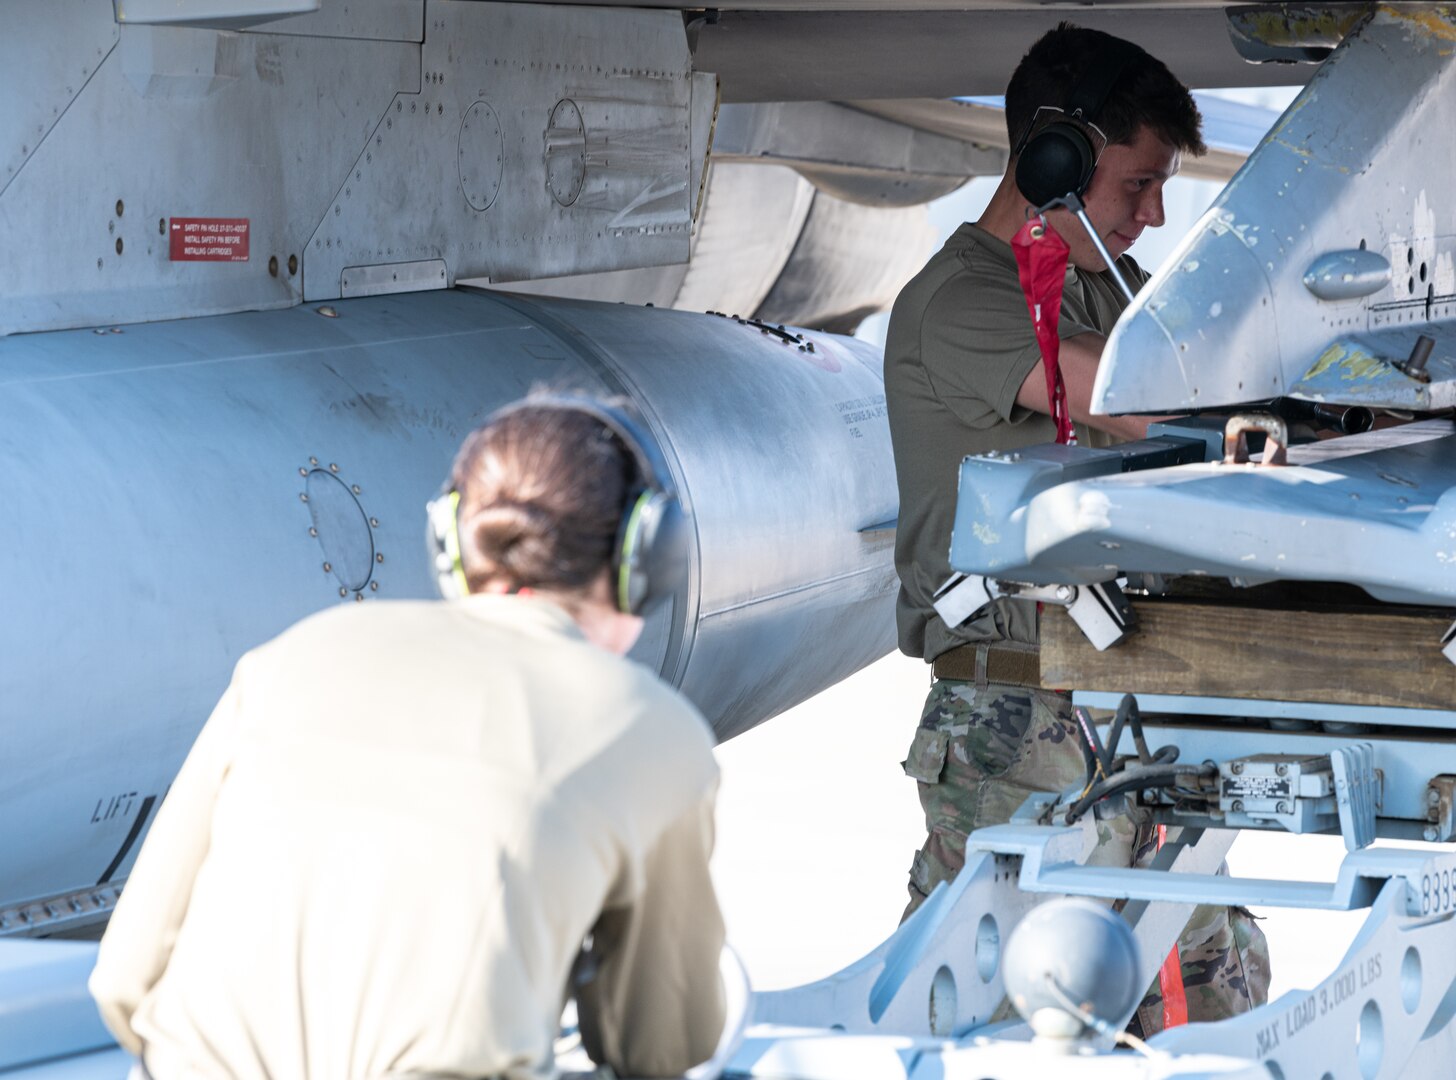 Senior Airman Ramos, 77th Expeditionary Fighter Generation Squadron weapons load crew member, guides a munition onto an F-16 Fighting Falcon before a flight during an Agile Combat Employment capstone event Feb. 27, 2021, at an airbase in the Kingdom of Saudi Arabia.